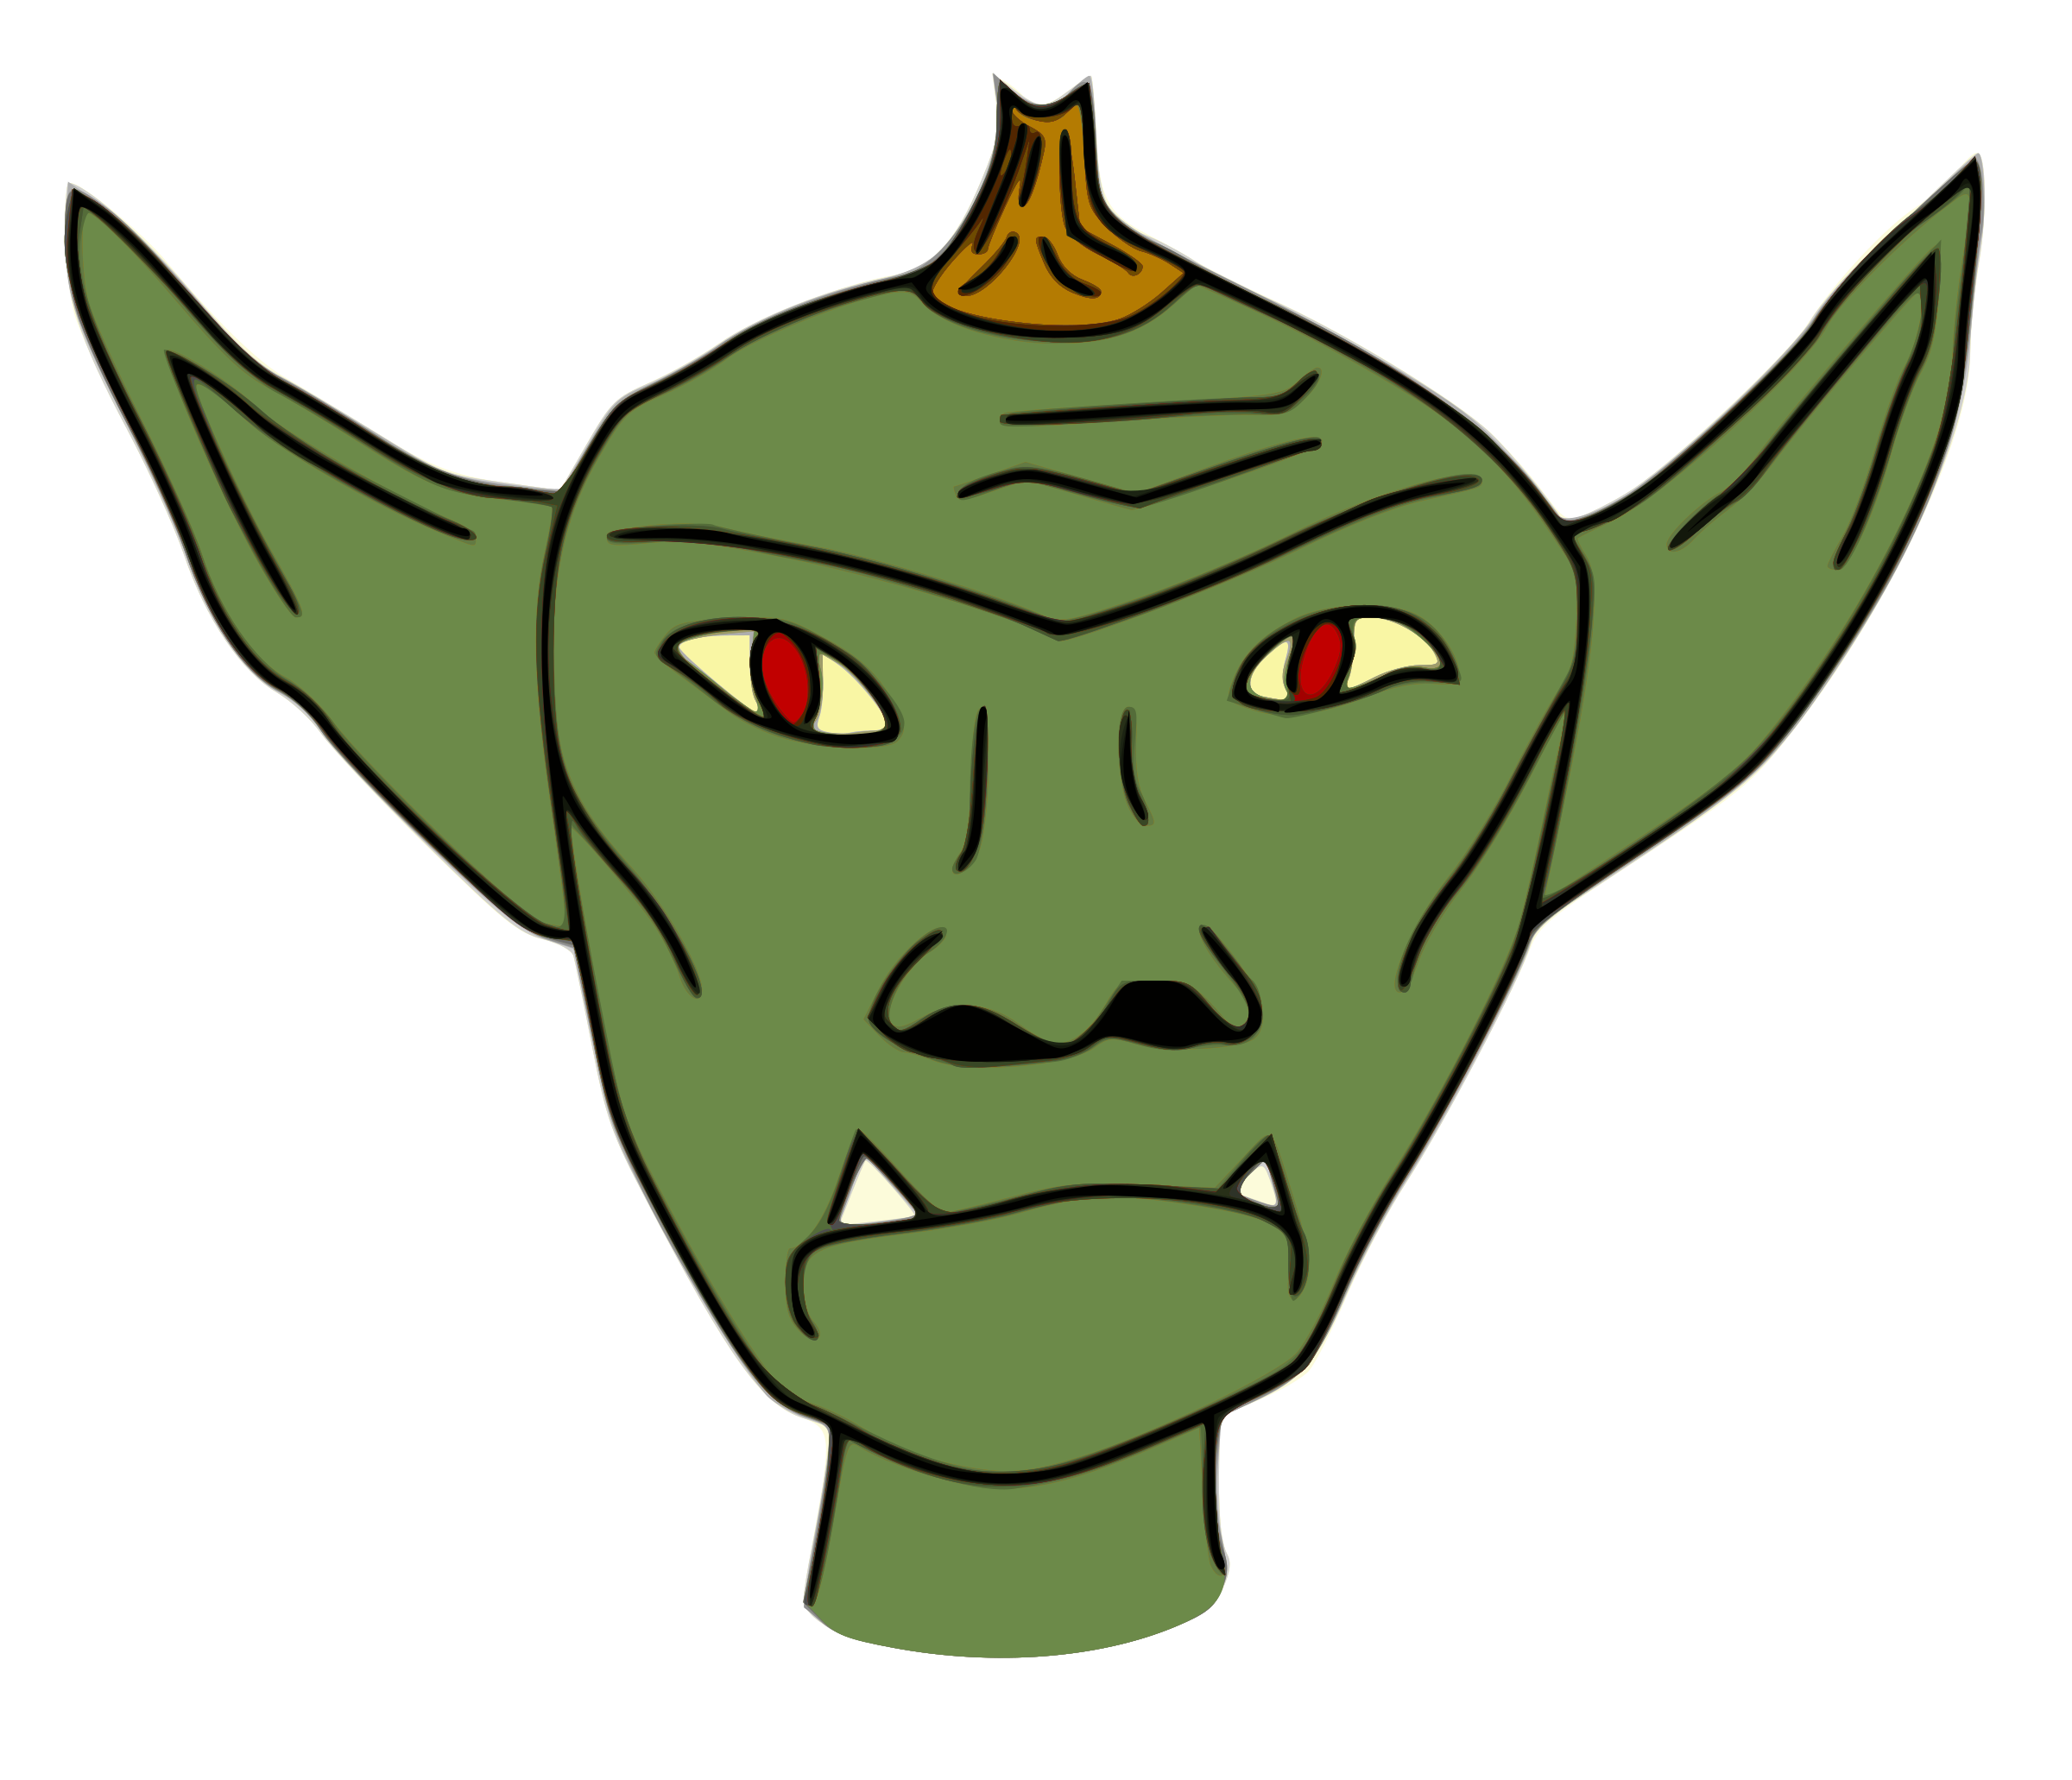 Download Head clipart yoda, Head yoda Transparent FREE for download ...